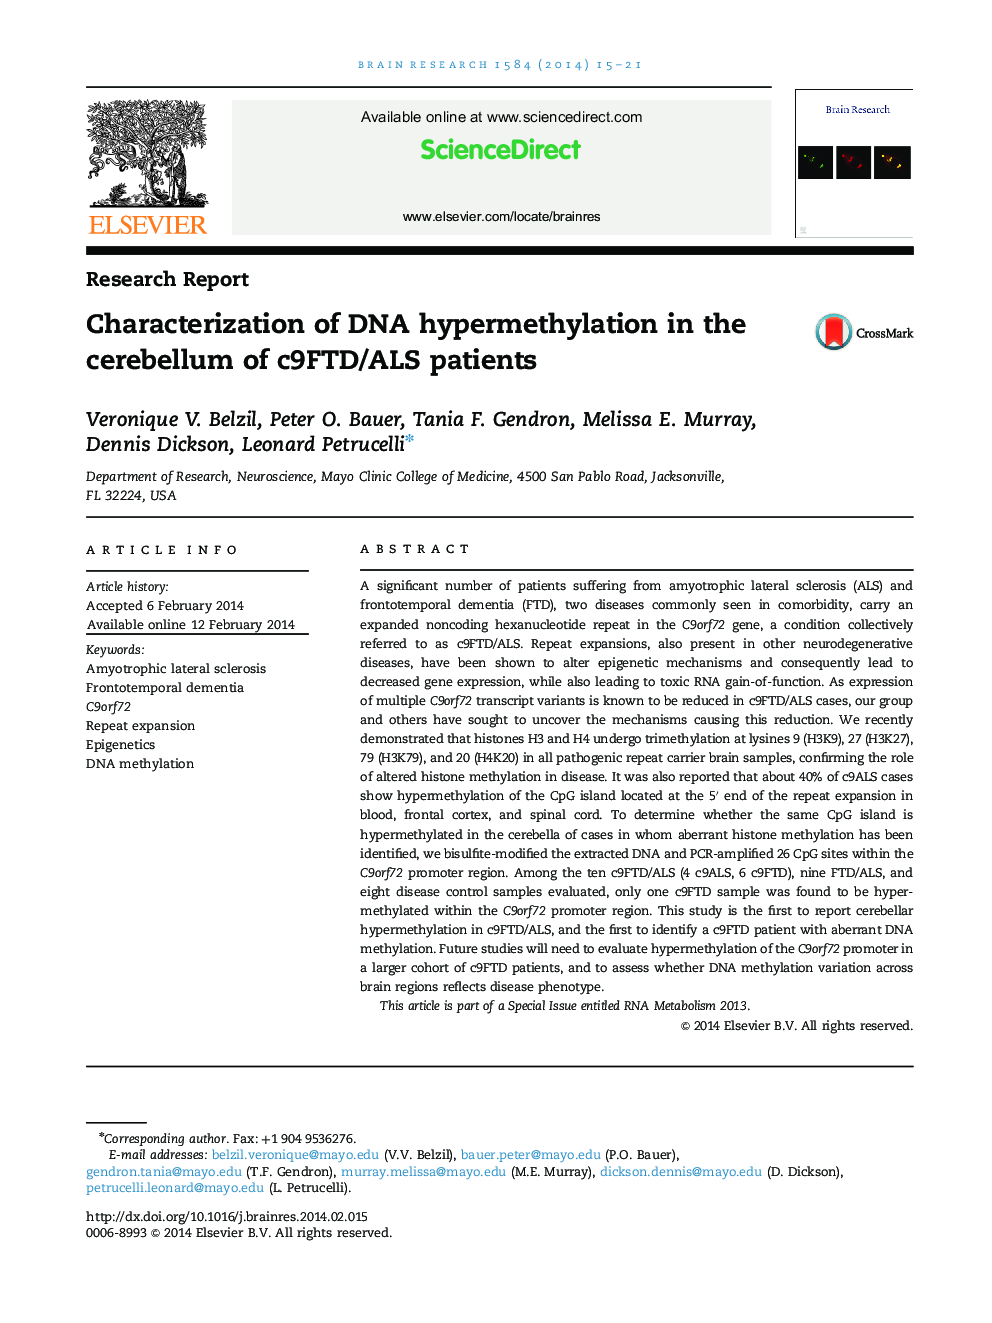 Research ReportCharacterization of DNA hypermethylation in the cerebellum of c9FTD/ALS patients